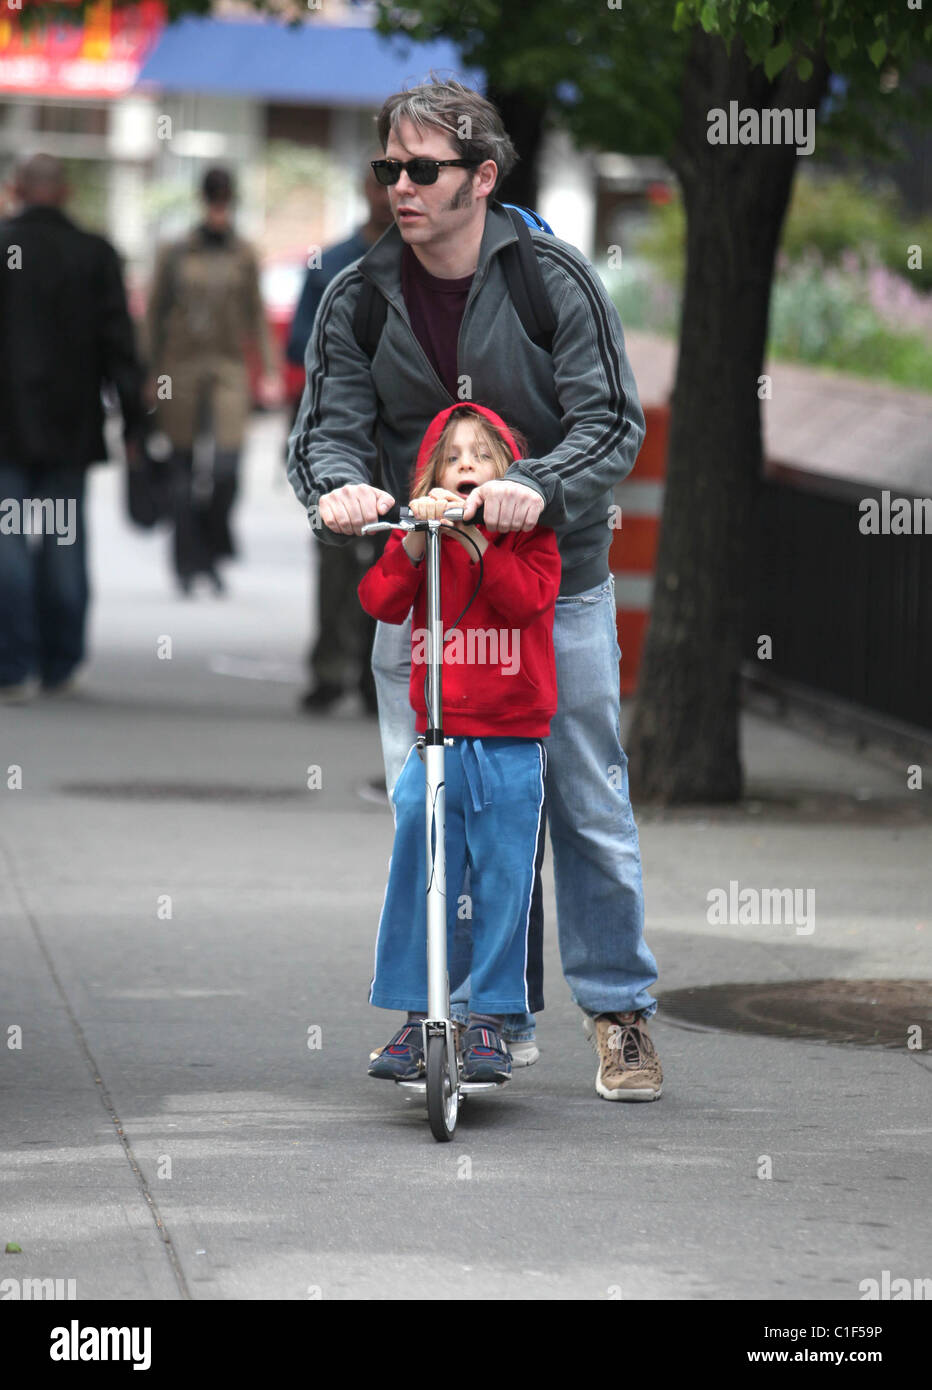 matthew broderick plays the doting father as he takes son james broderick C1F59P